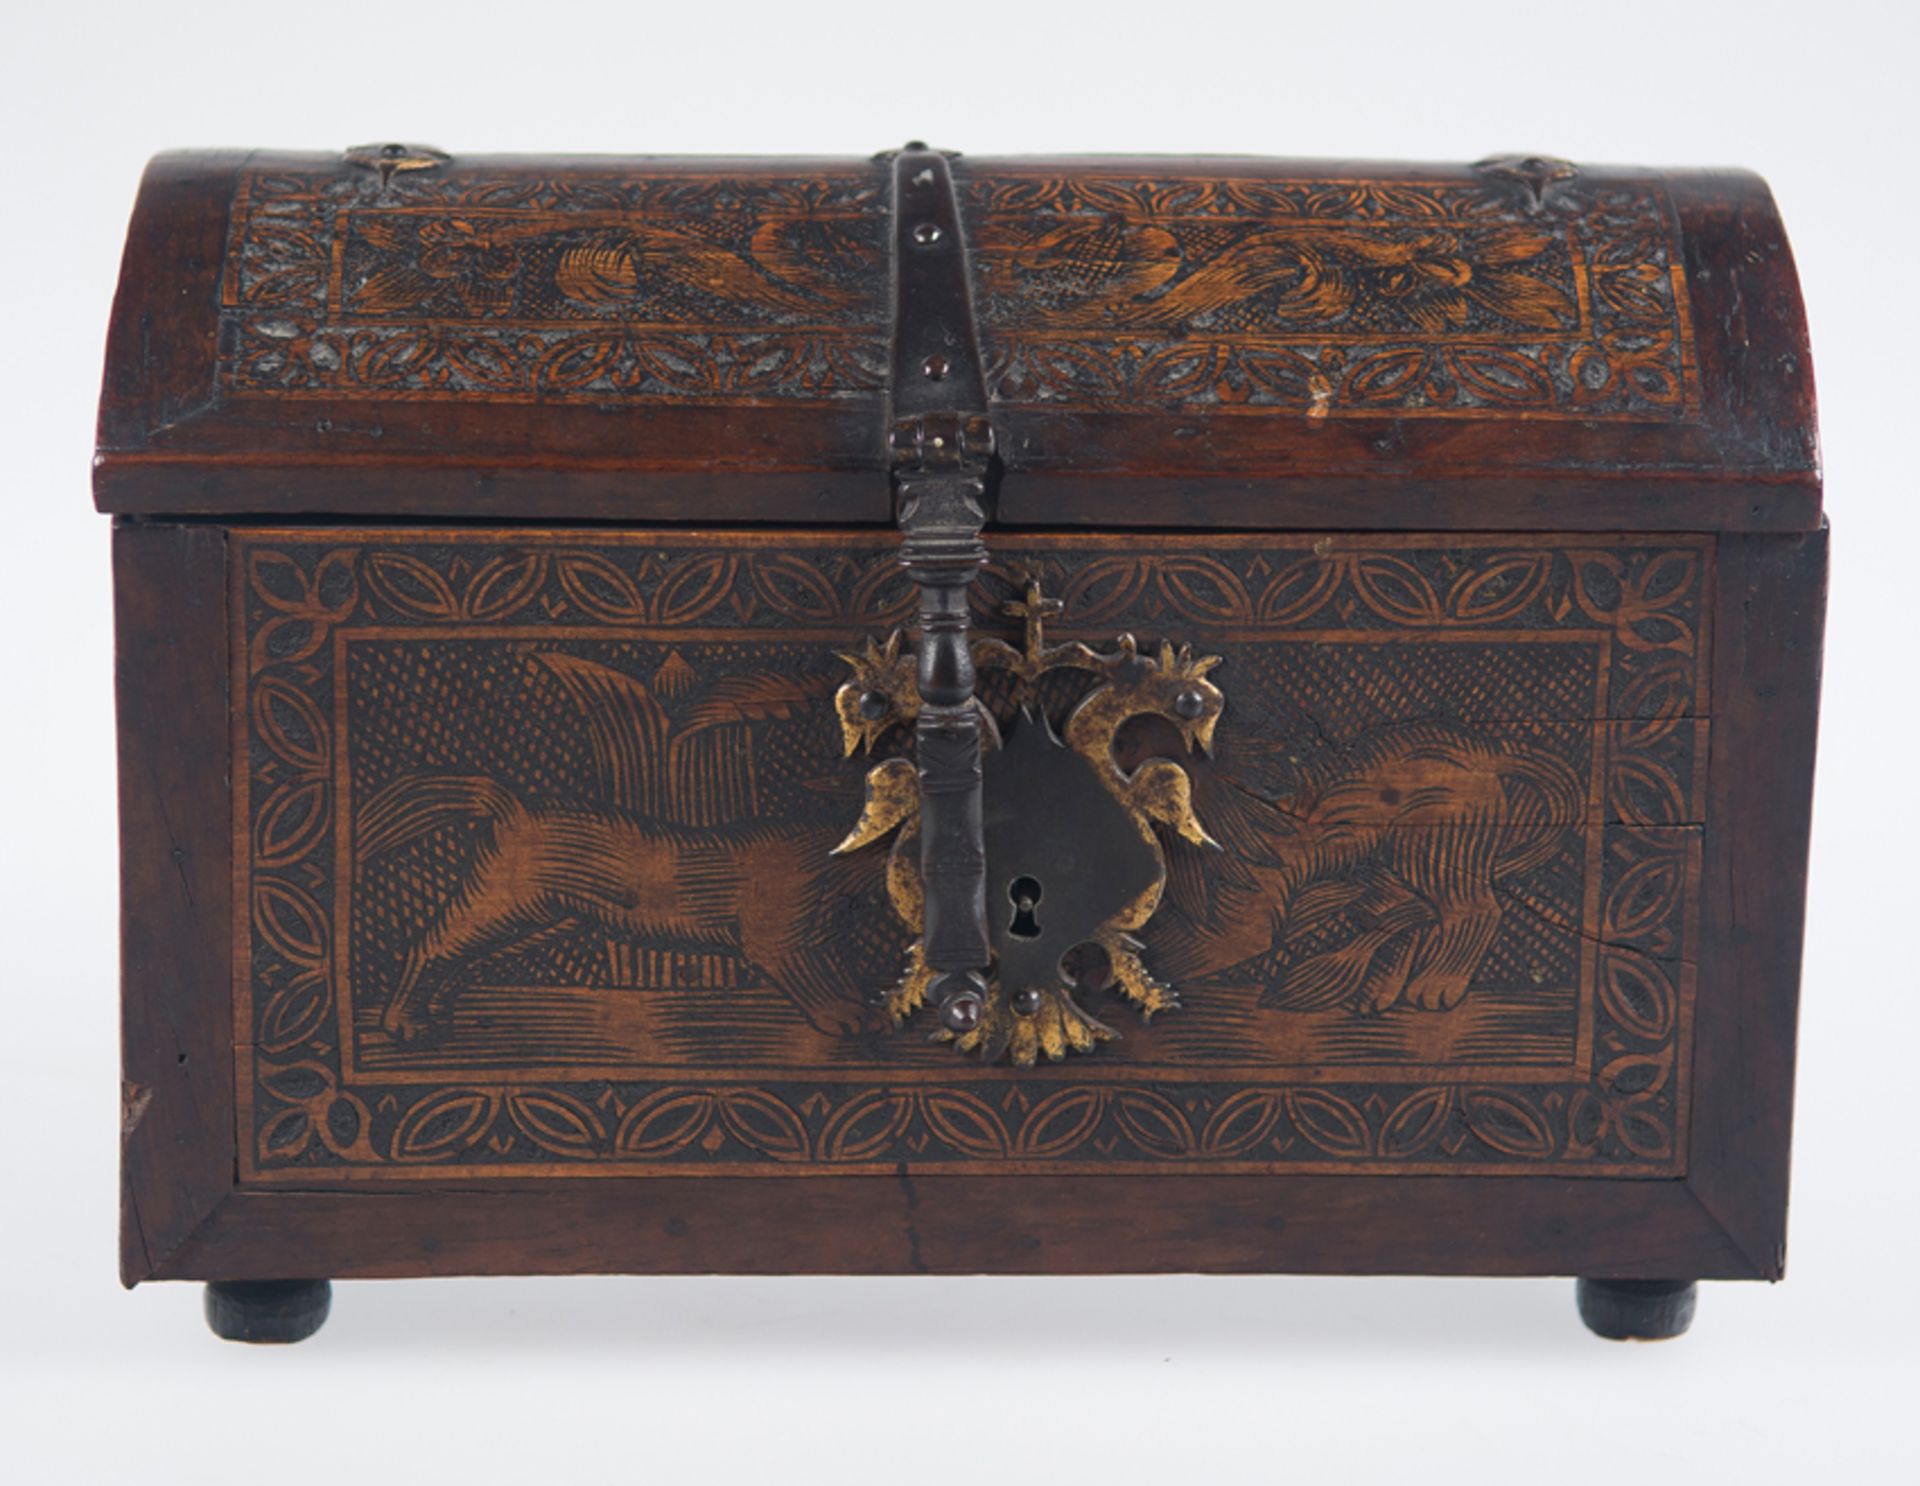 Engraved wooden chest with iron fittings and curved lid. Colonial work. Villa Alta de San Ildefonso, - Image 3 of 11